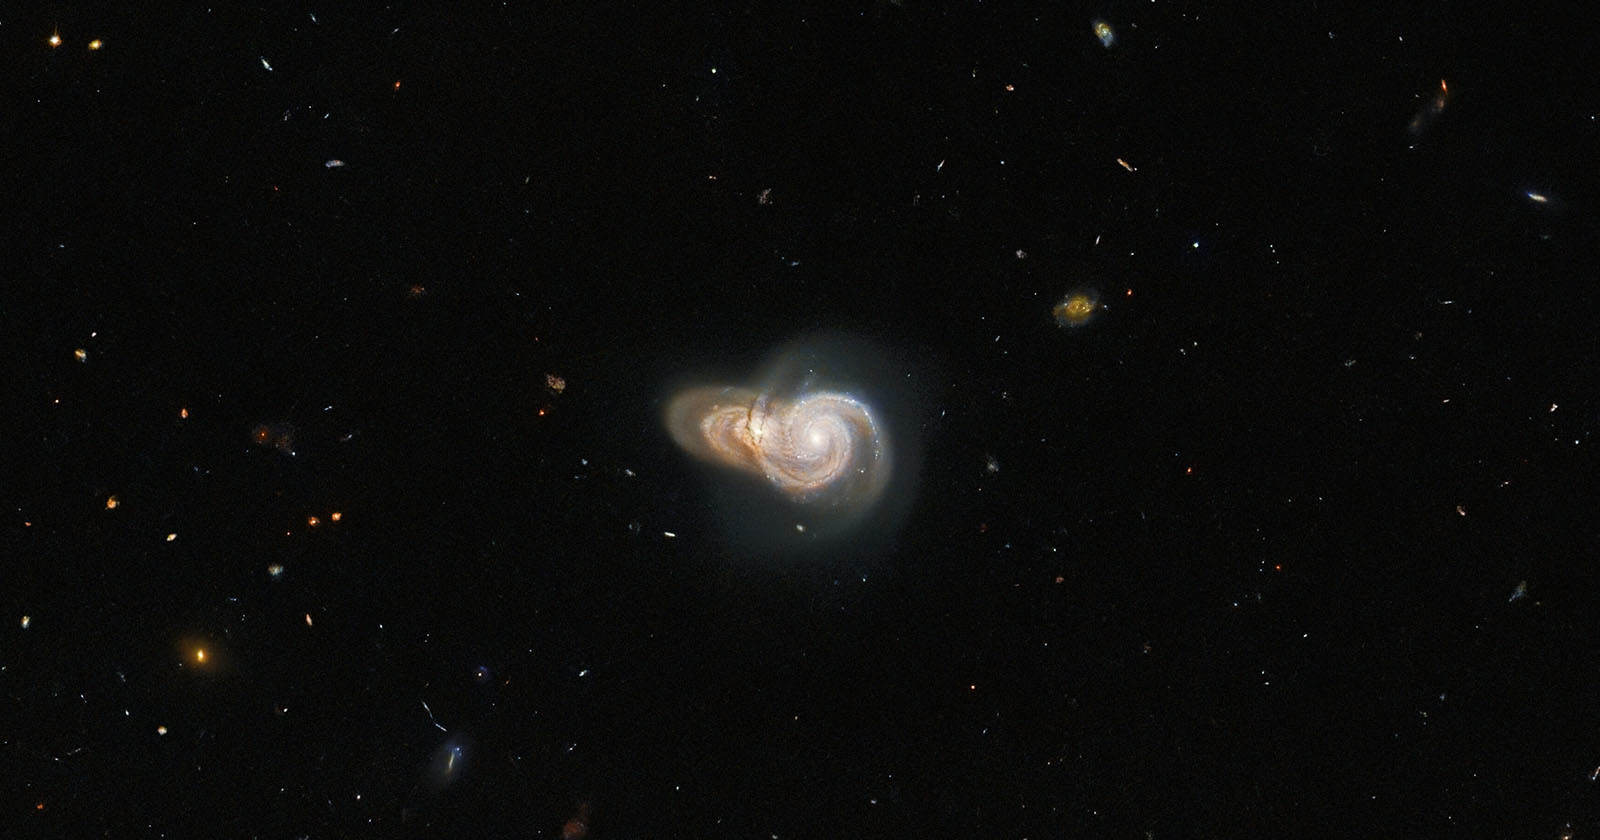 Hubble Captures Optical Illusion of Two Spiral Galaxies Colliding